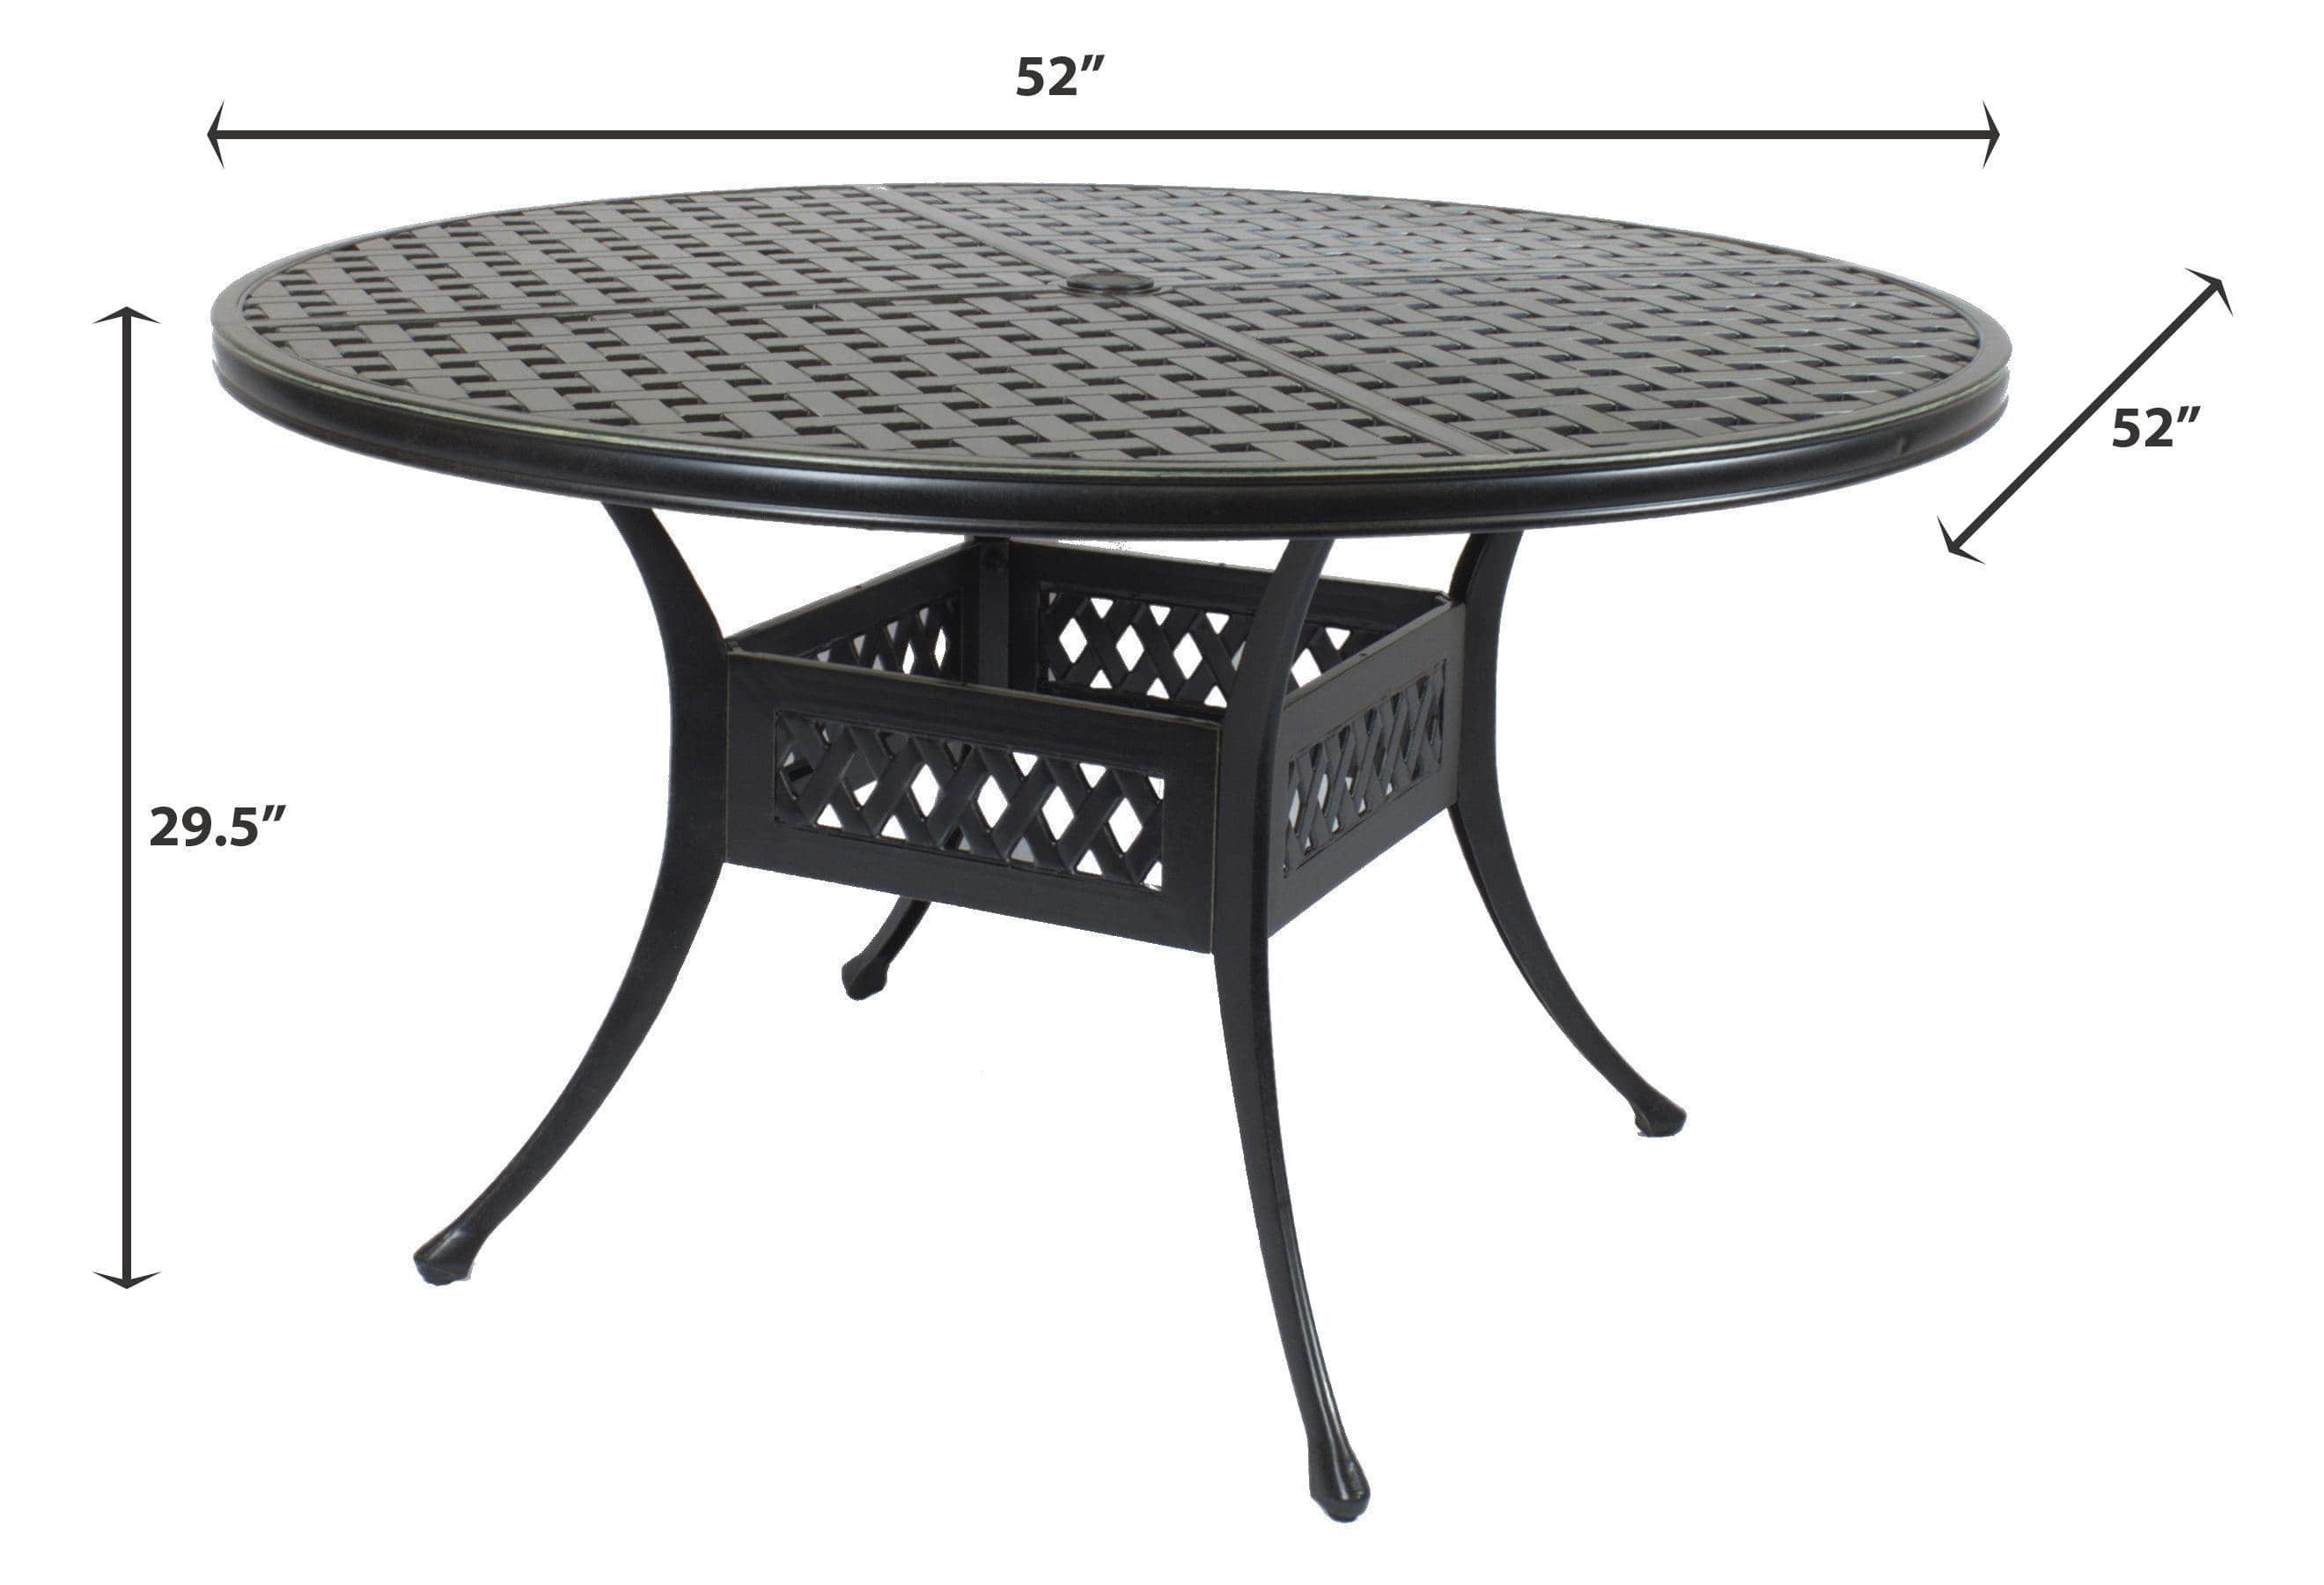 Lawton Casual Comfort Outdoor Dining Table Lawton Casual Comfort - Round Dining Table